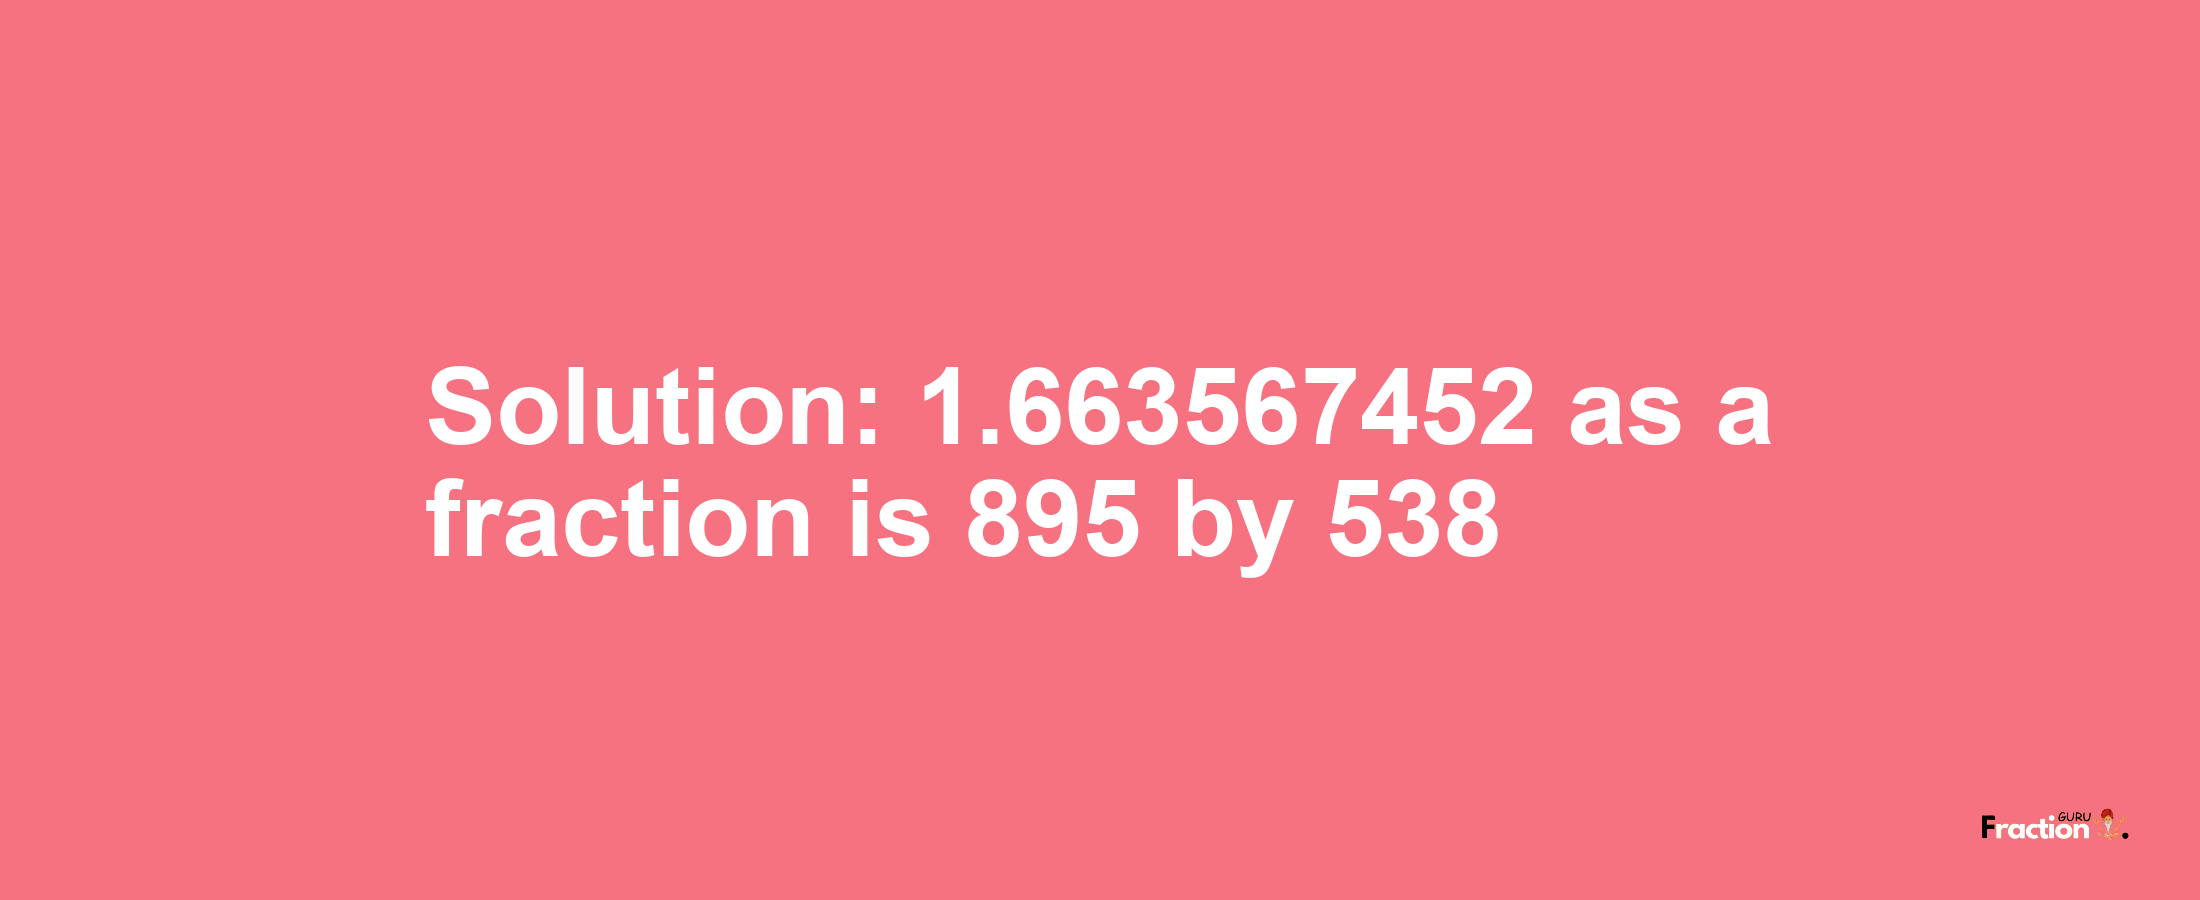 Solution:1.663567452 as a fraction is 895/538